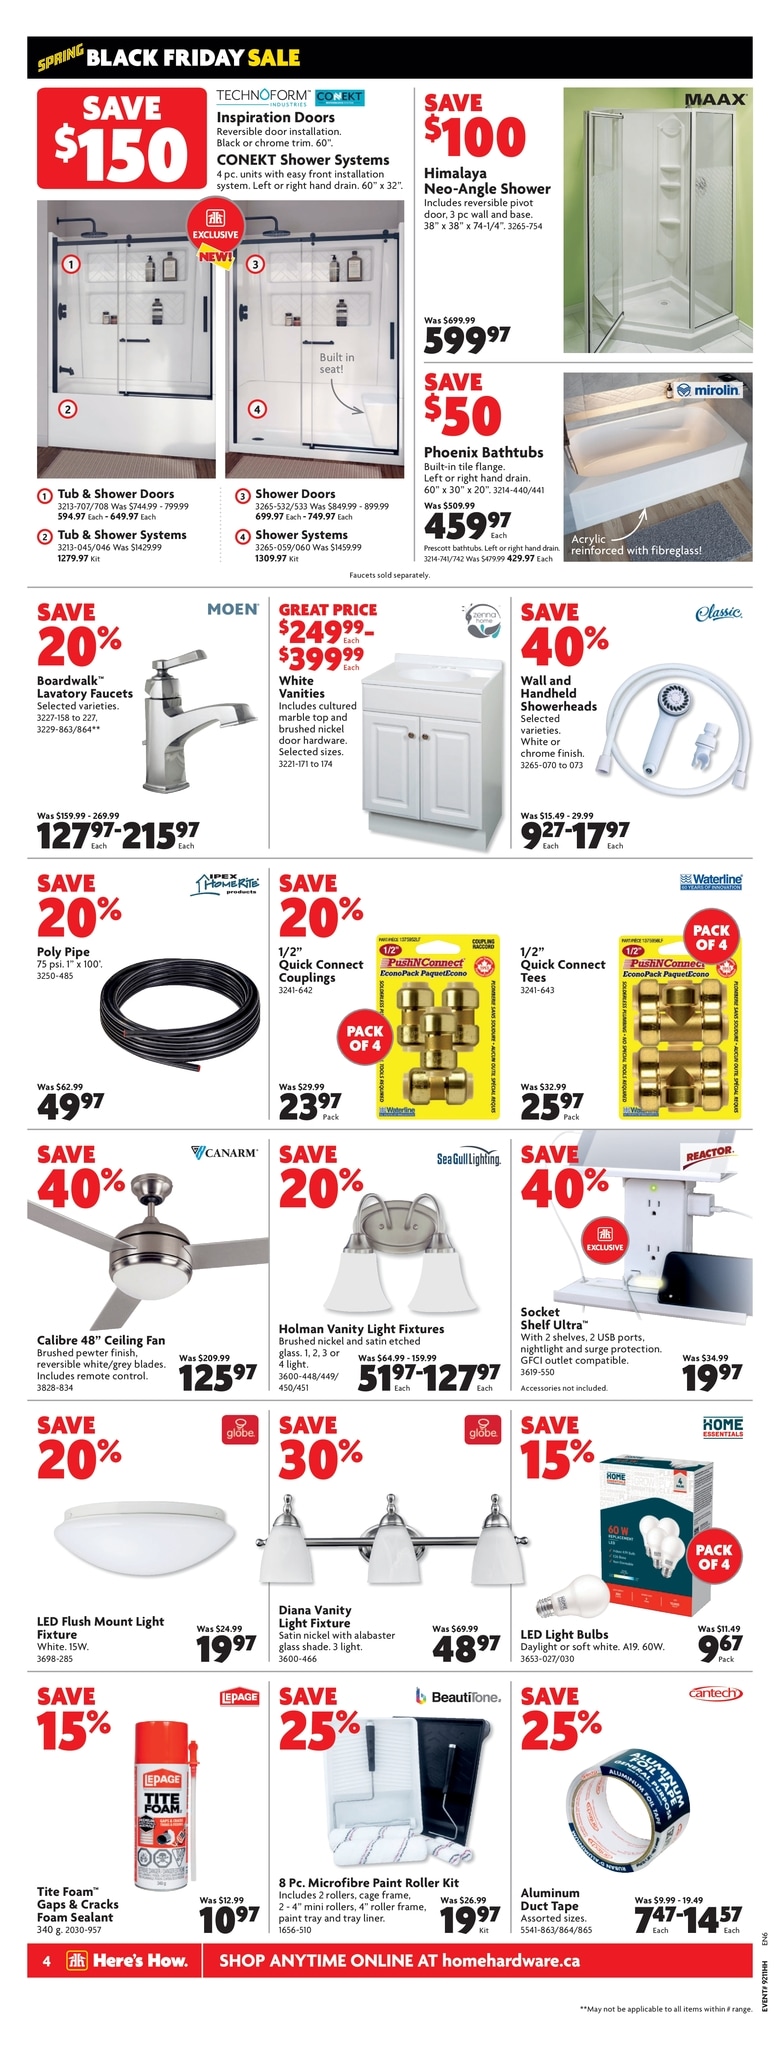 Home Hardware - Weekly Flyer Specials - Page 6